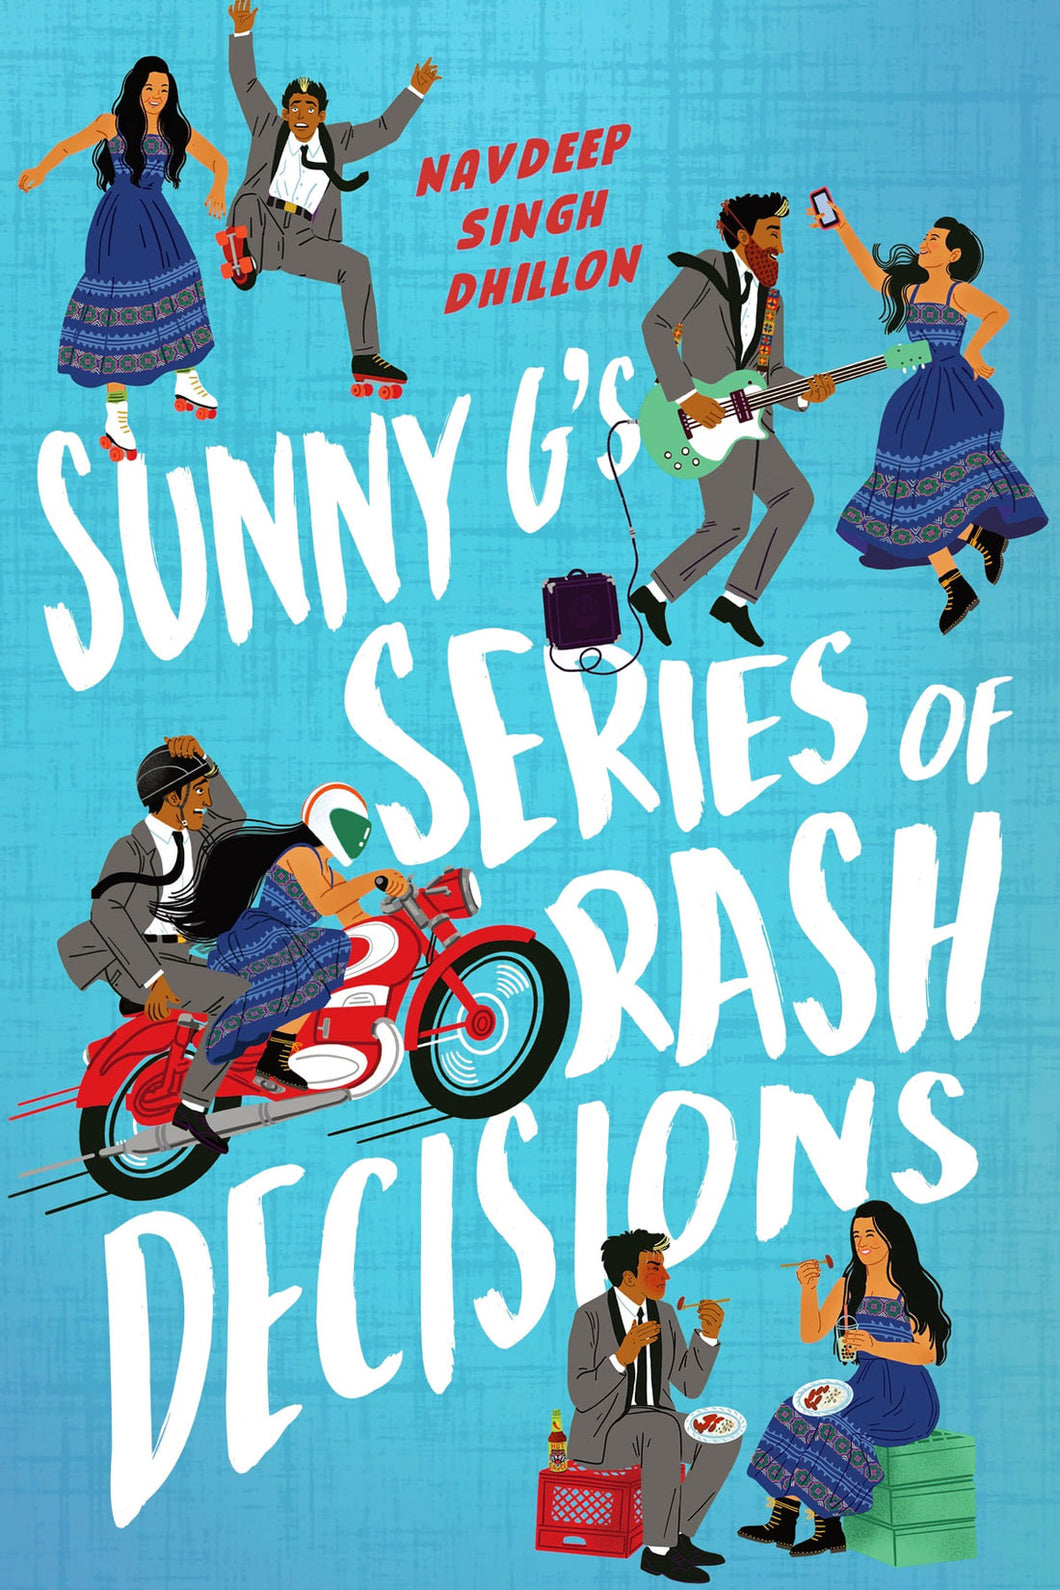 Sunny G's Series of Rash Decisions by Navdeep Singh Dhillon / Hardcover - NEW BOOK